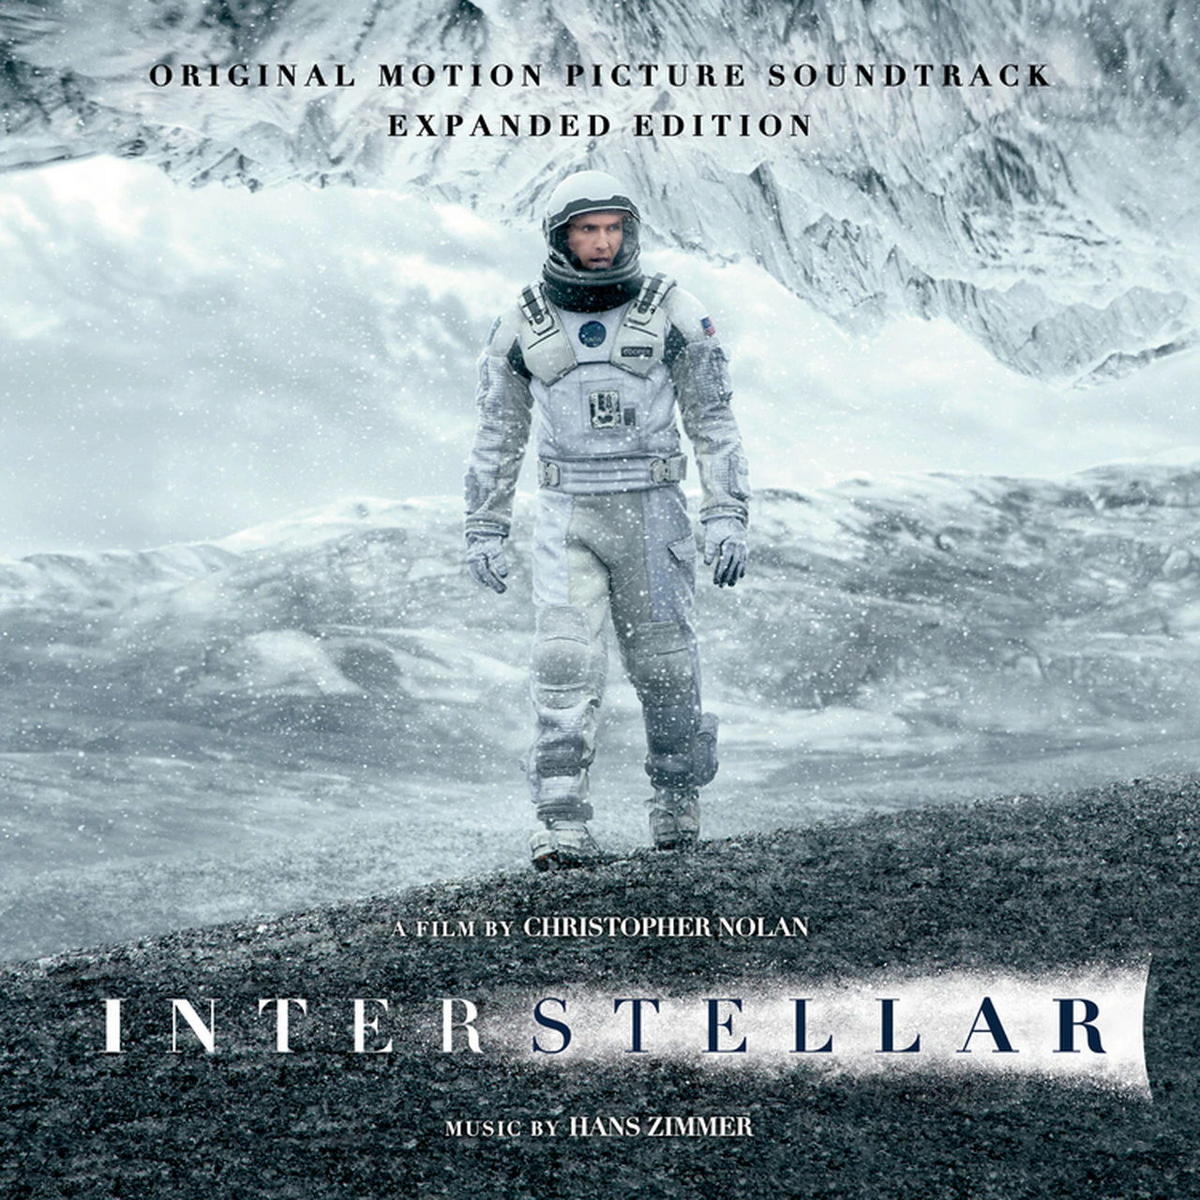 Саундтрек Sony Hans Zimmer - Interstellar (Original Motion Picture Soundtrack) (4LP/Expanded Edition) рок hollywood records various artists guardians of the galaxy vol 2 awesome mix vol 2 original motion picture soundtrack